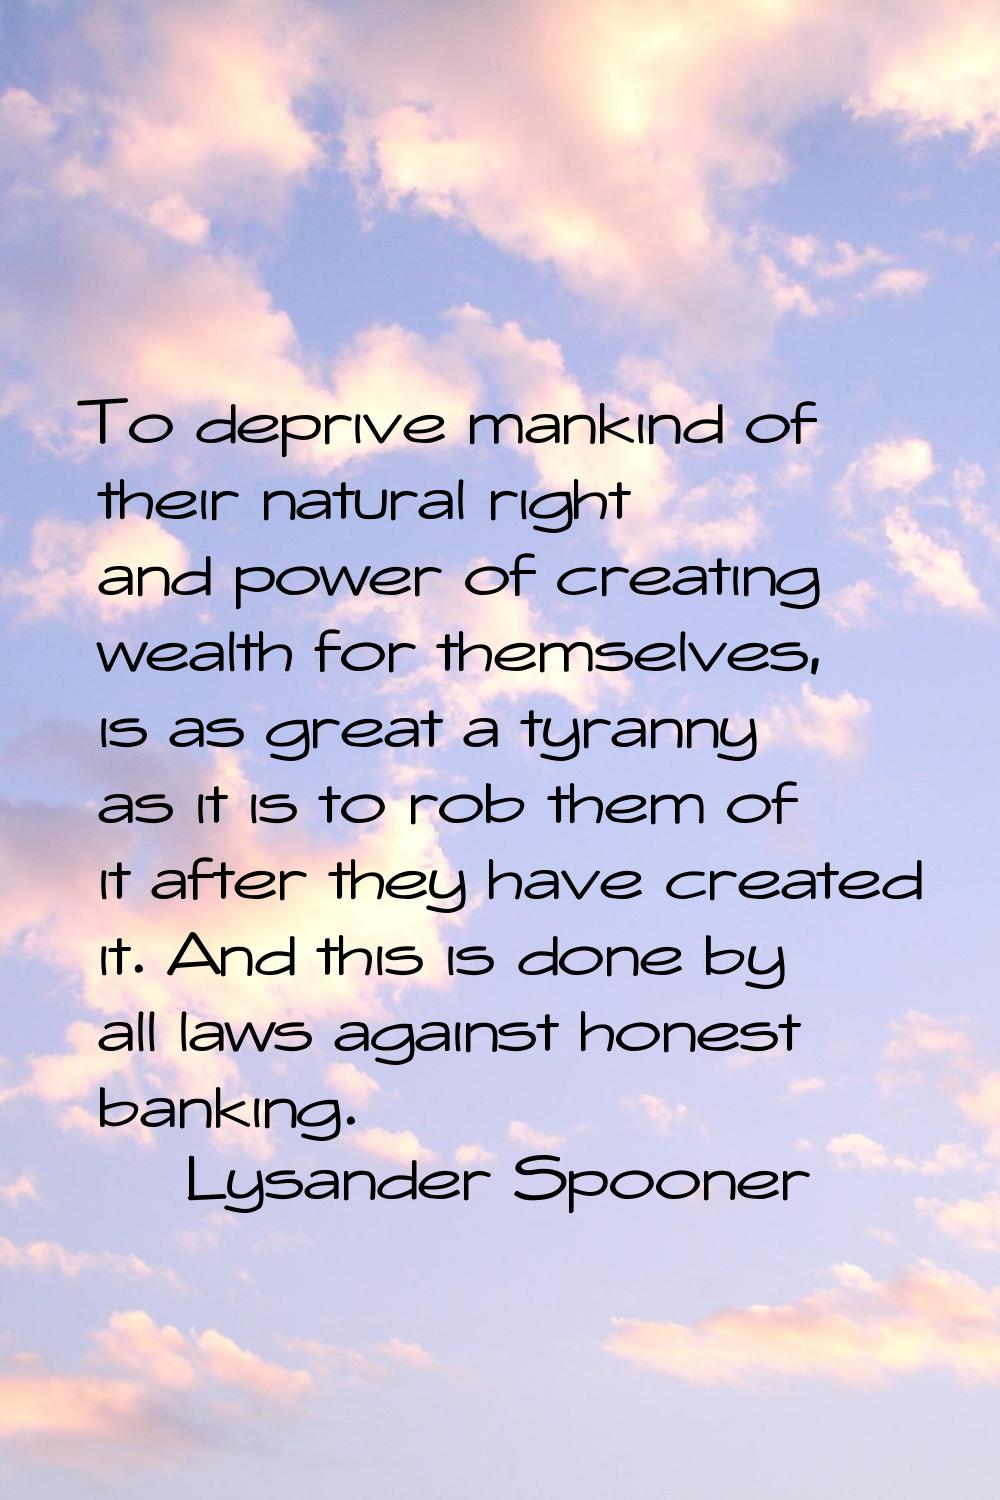 To deprive mankind of their natural right and power of creating wealth for themselves, is as great 